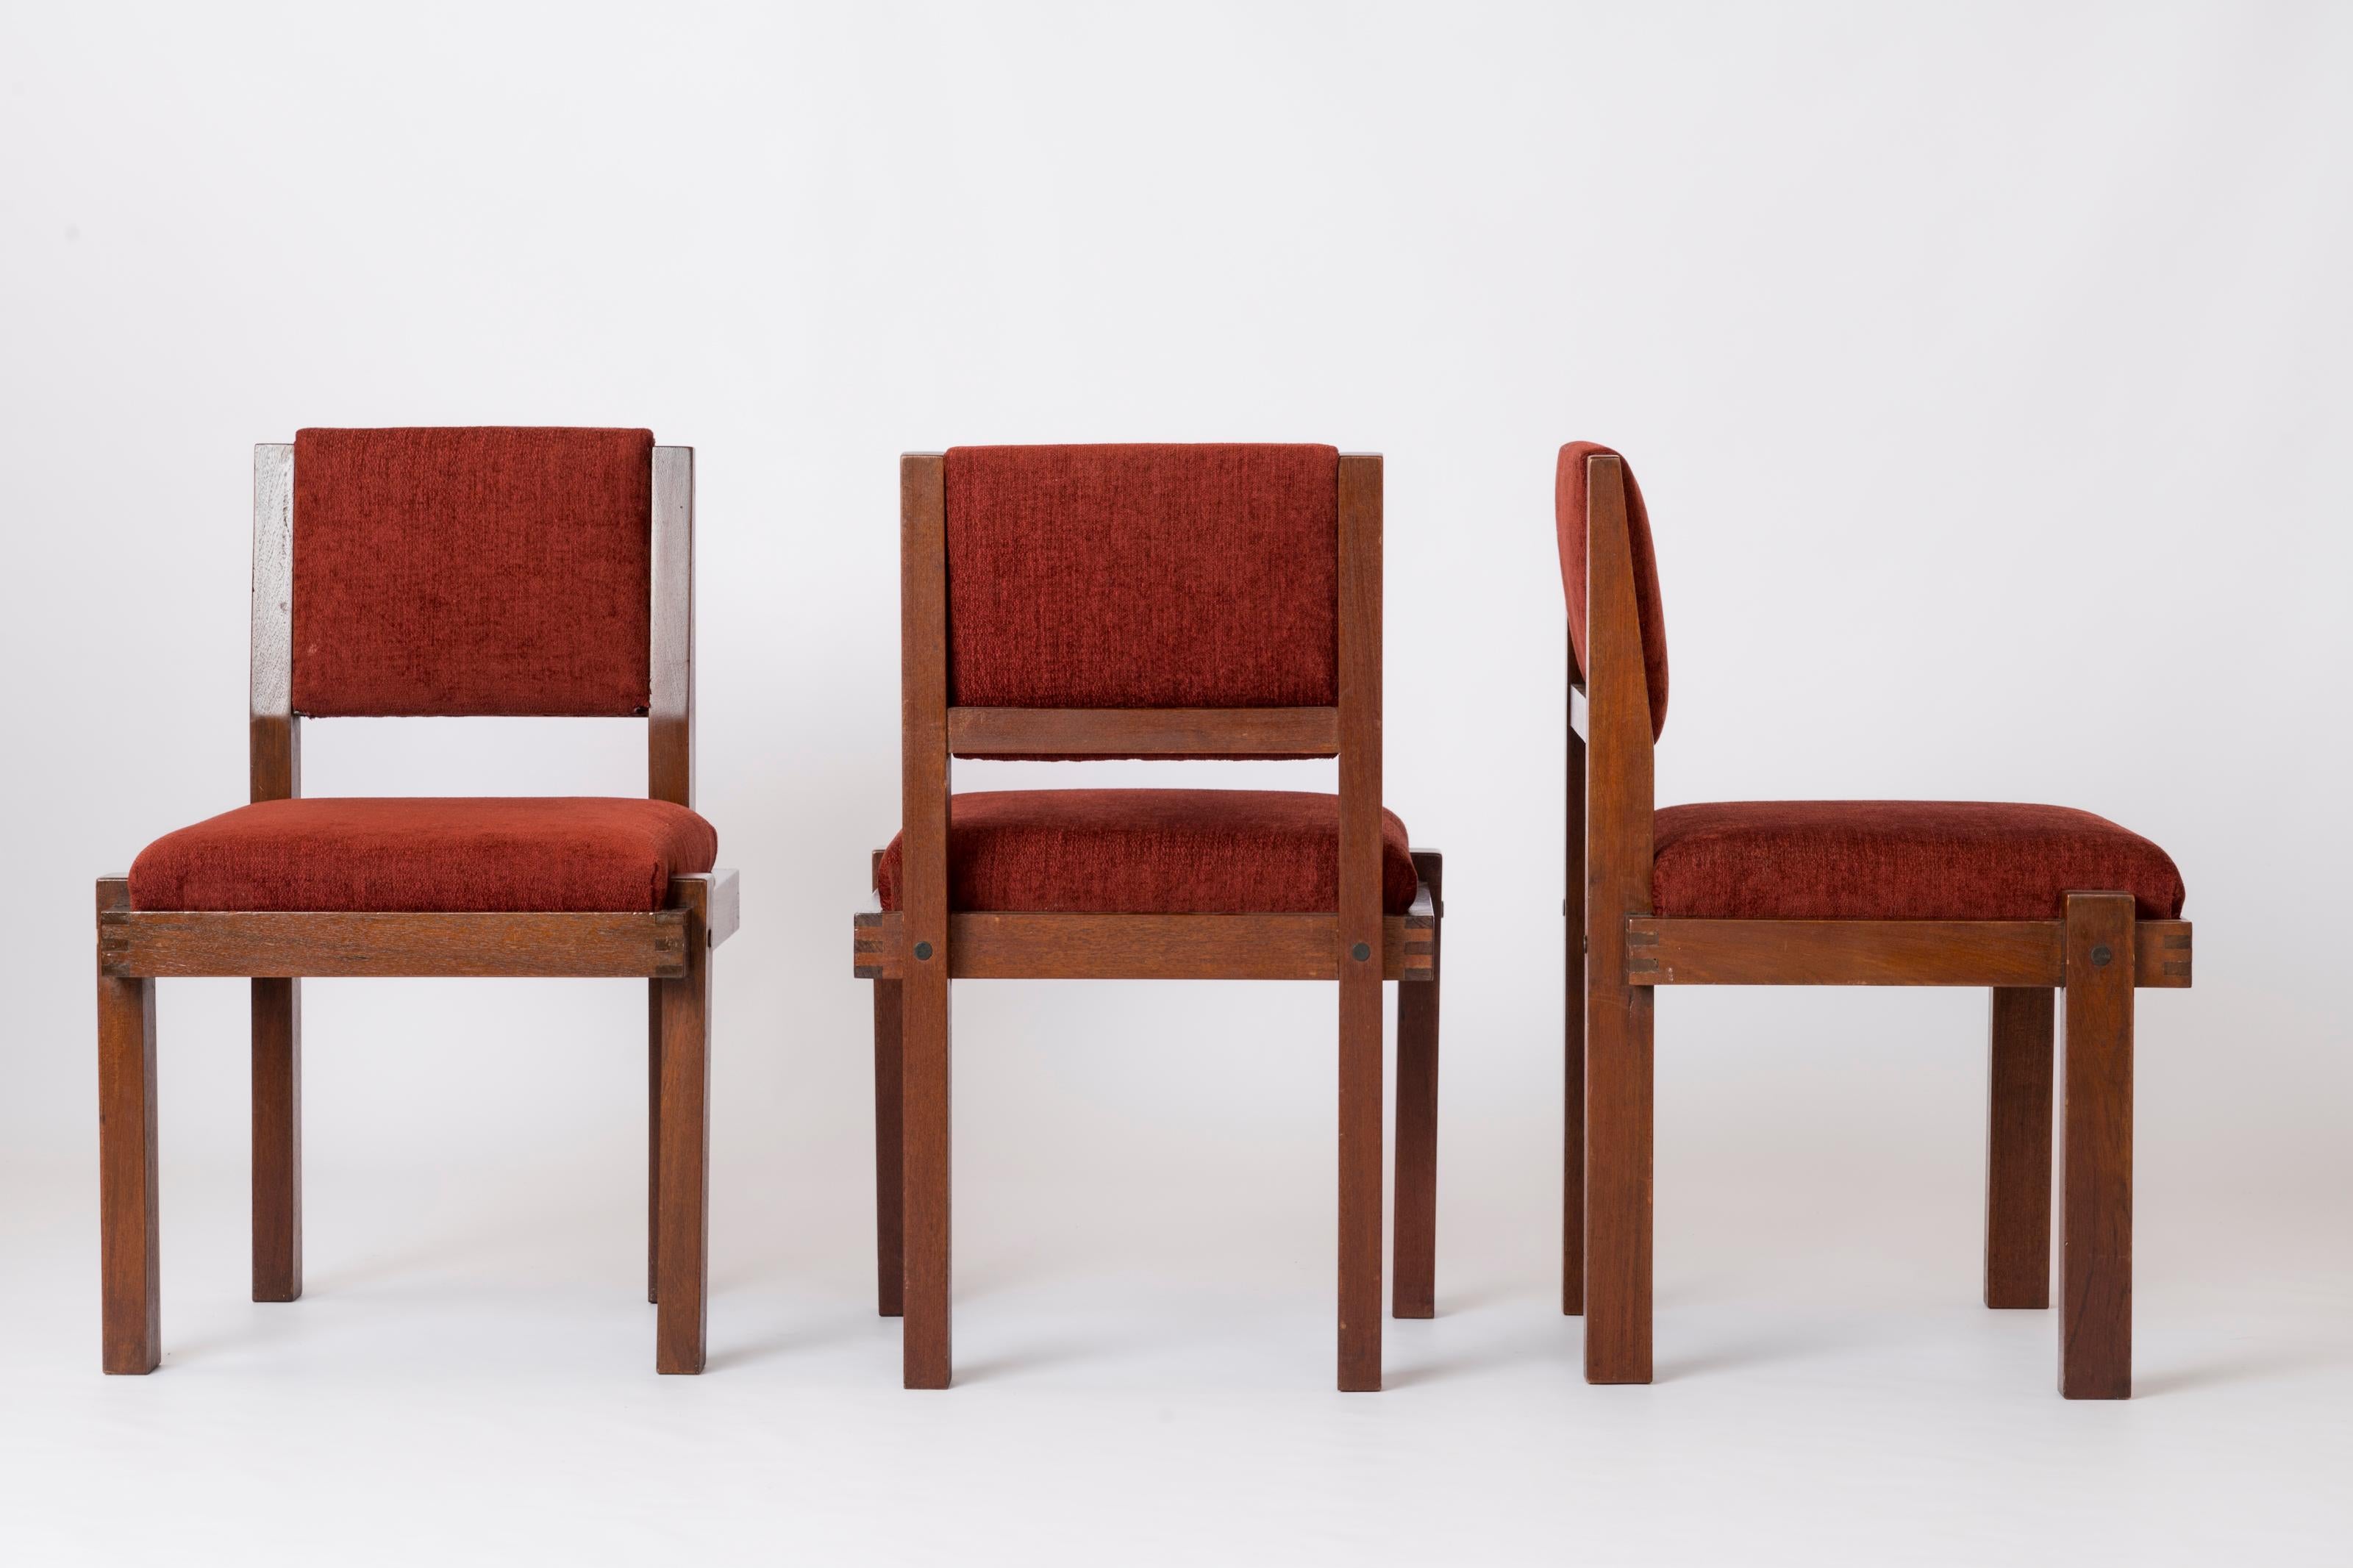 French Six Modernist Solid Mahogany and Bordeaux Upholstery Chairs - France 1970's For Sale